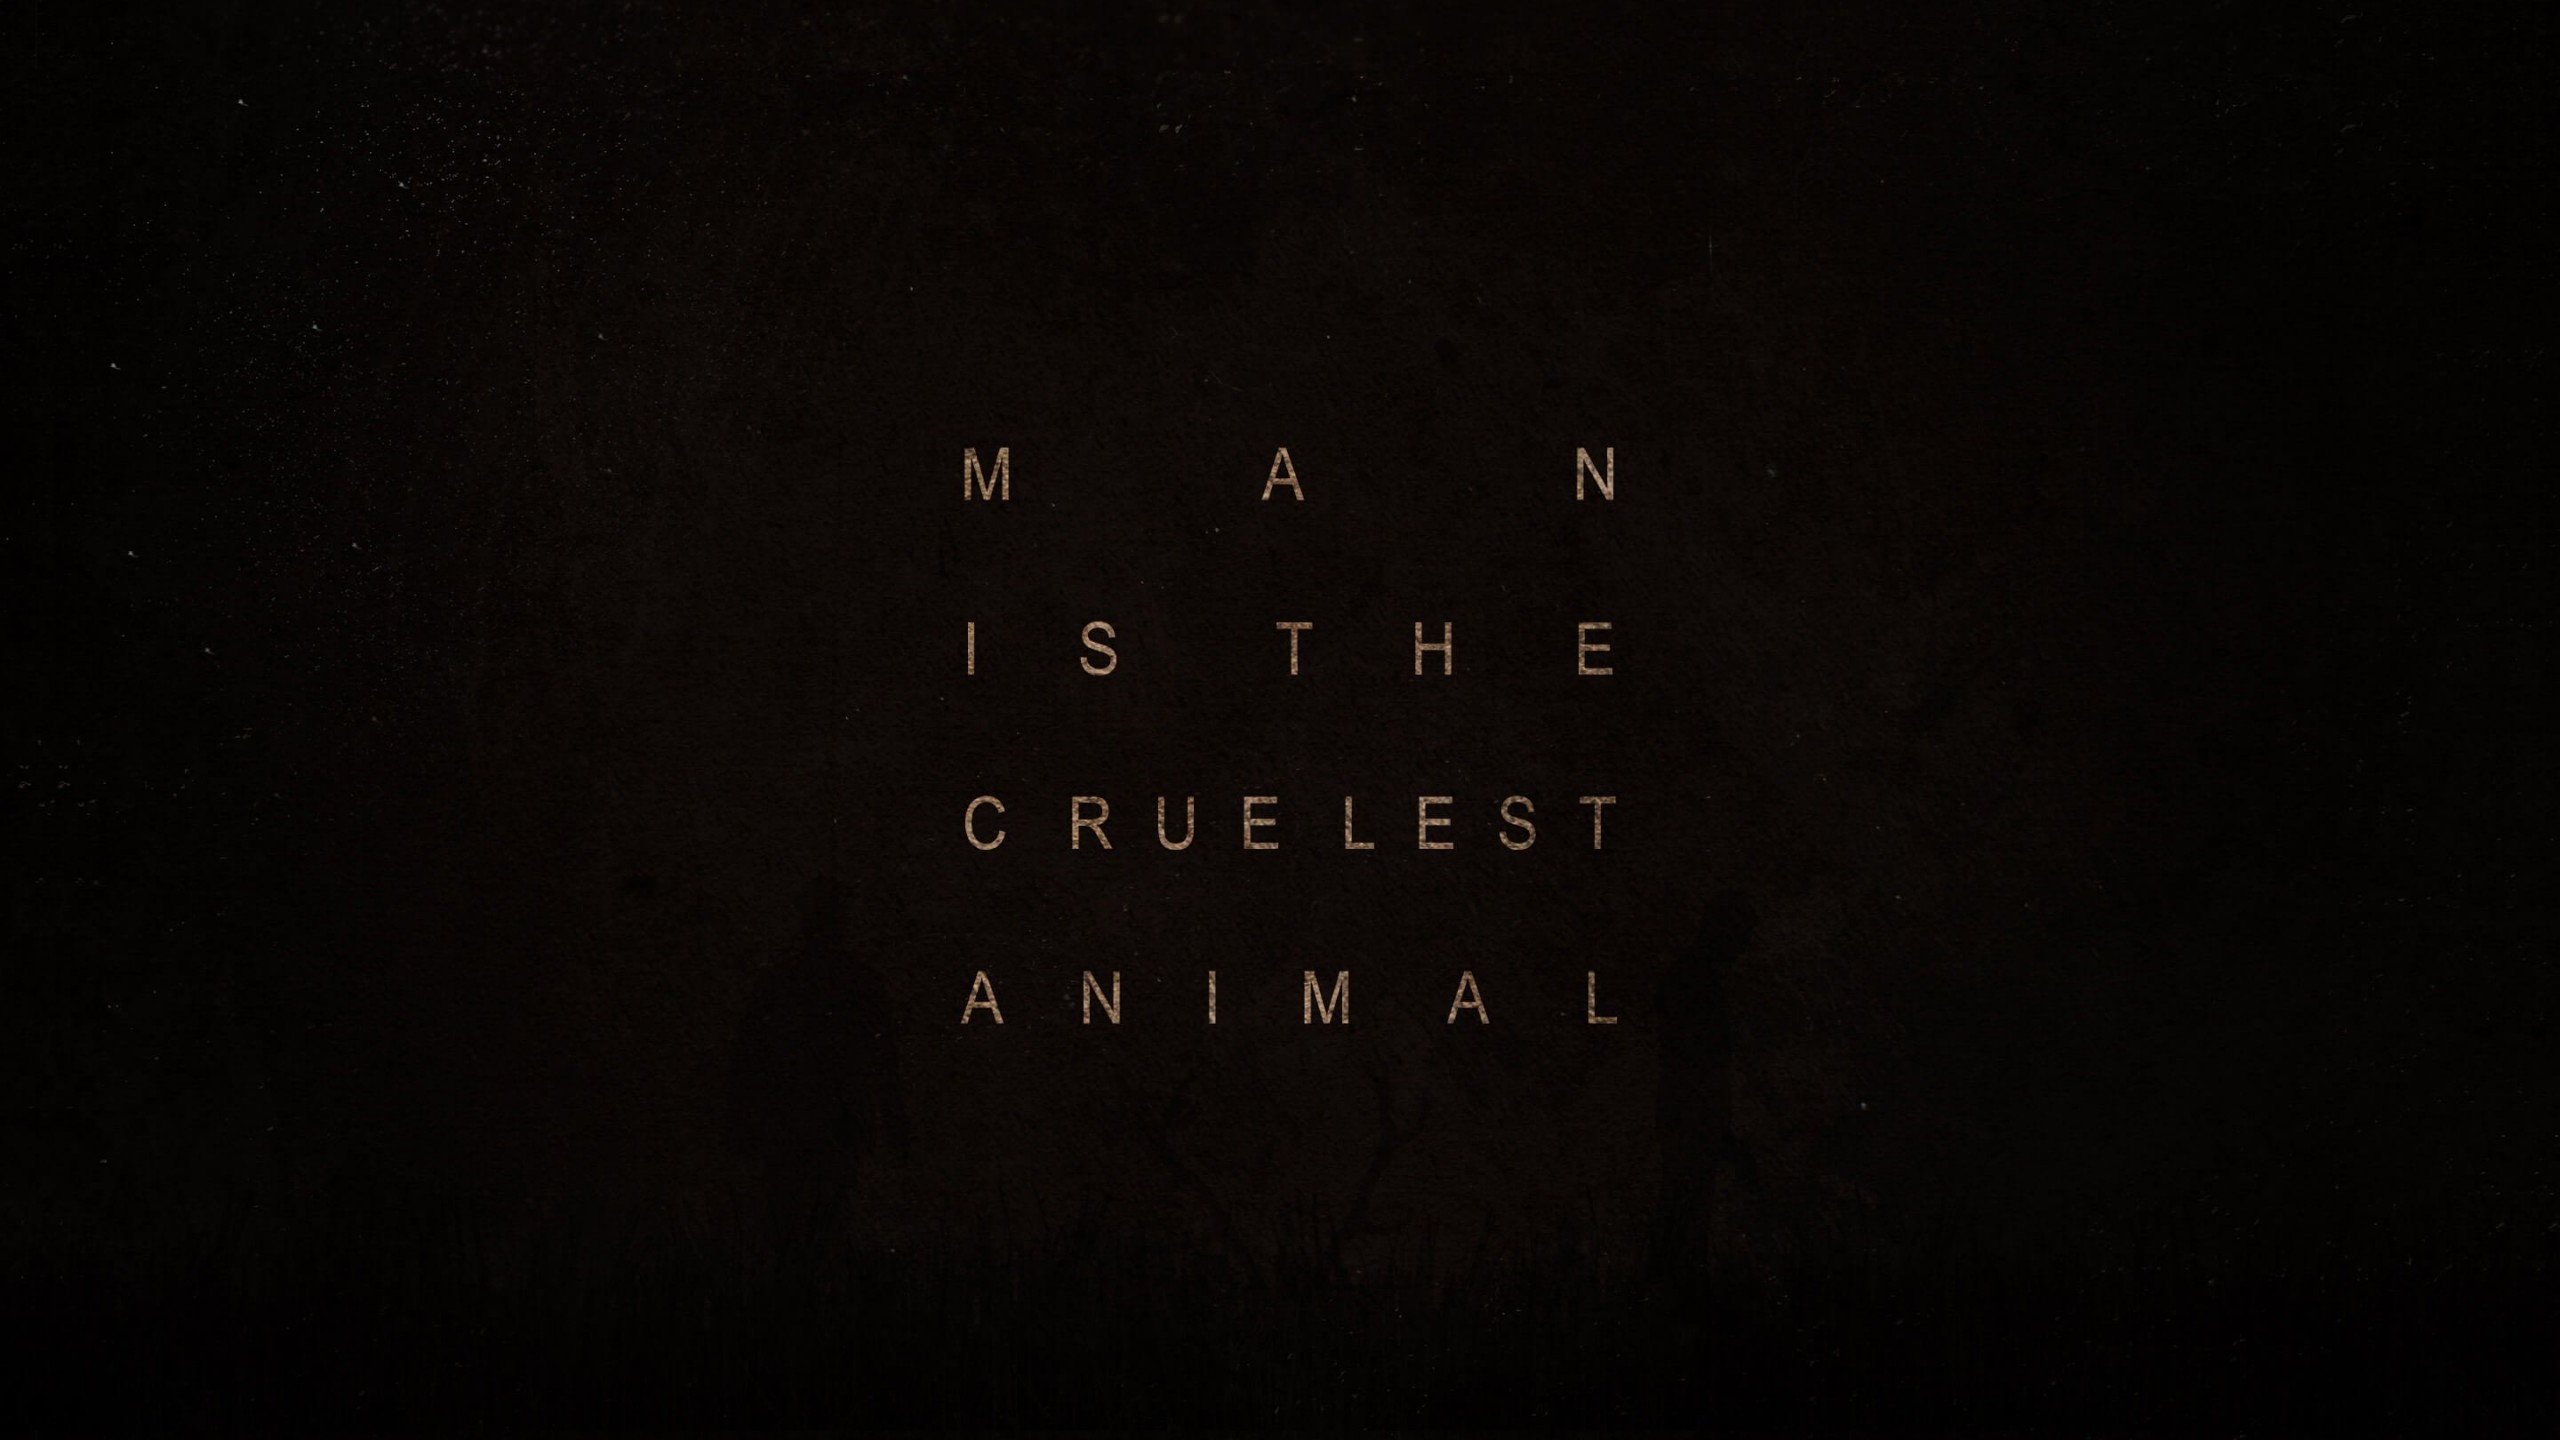 True Detective Quote Wallpaper for Social Media YouTube Channel Art